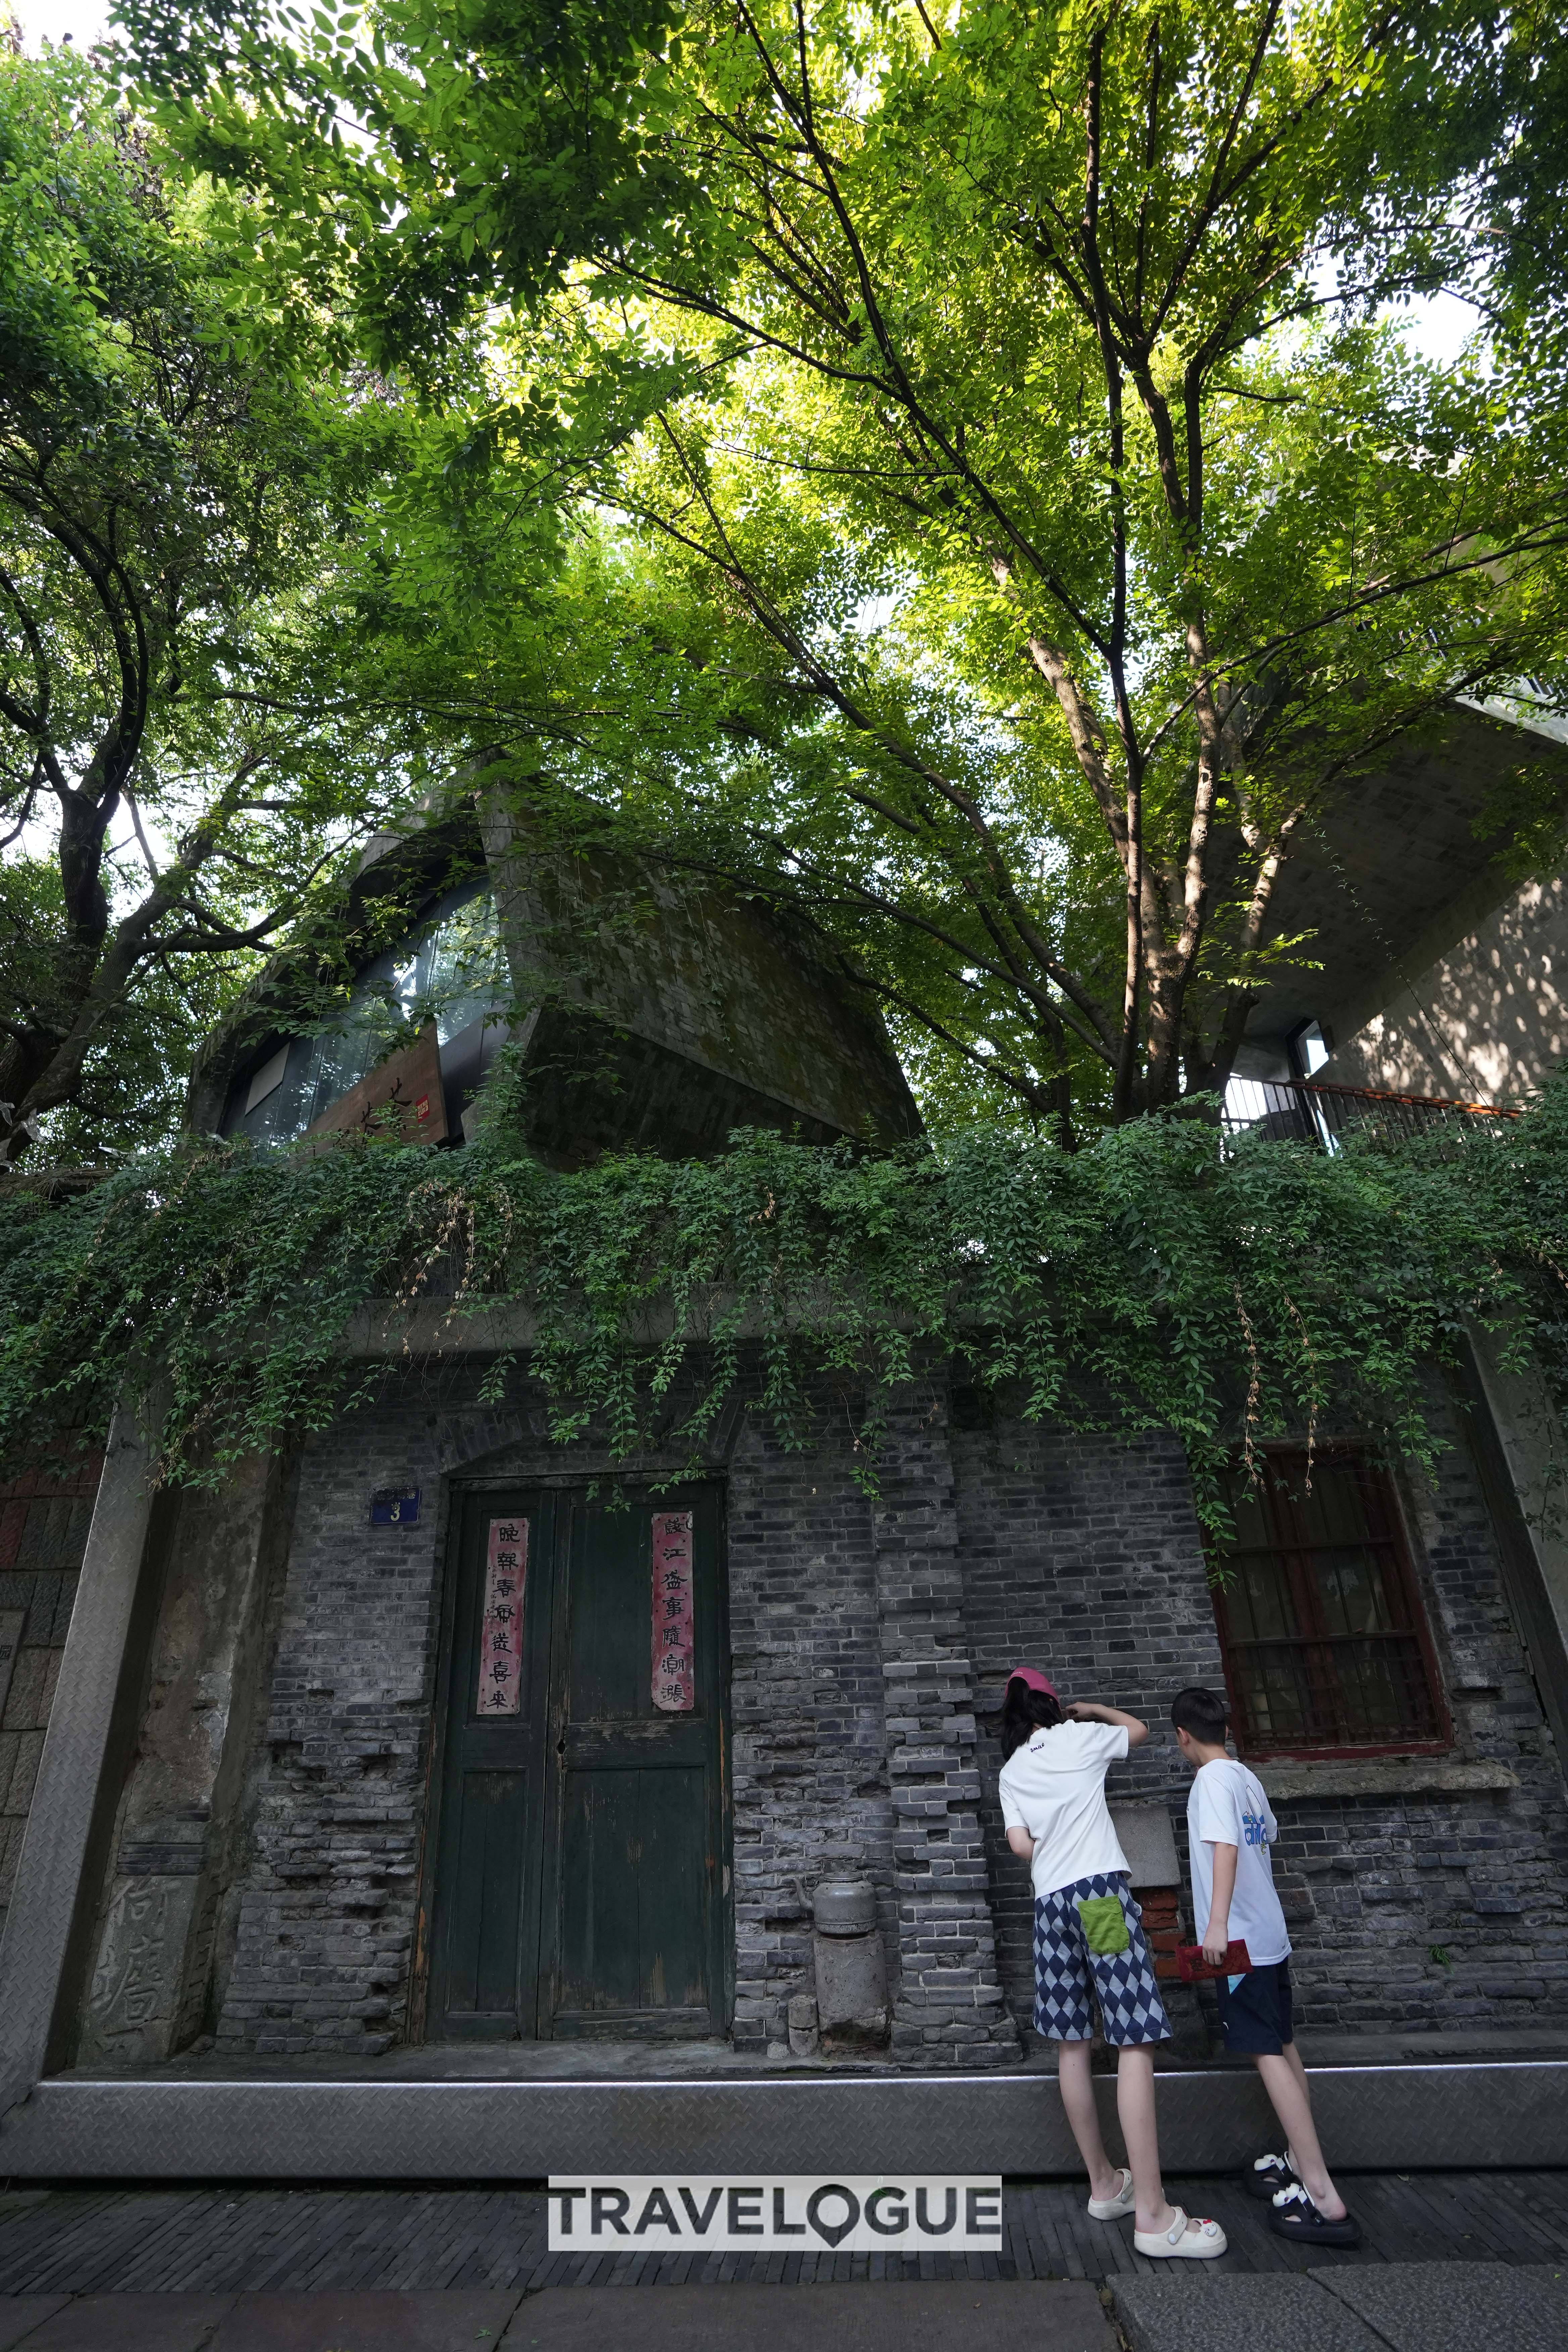 This undated photo shows a view of Qinghe Old Street in Hangzhou, east China's Zhejiang Province. /CGTN